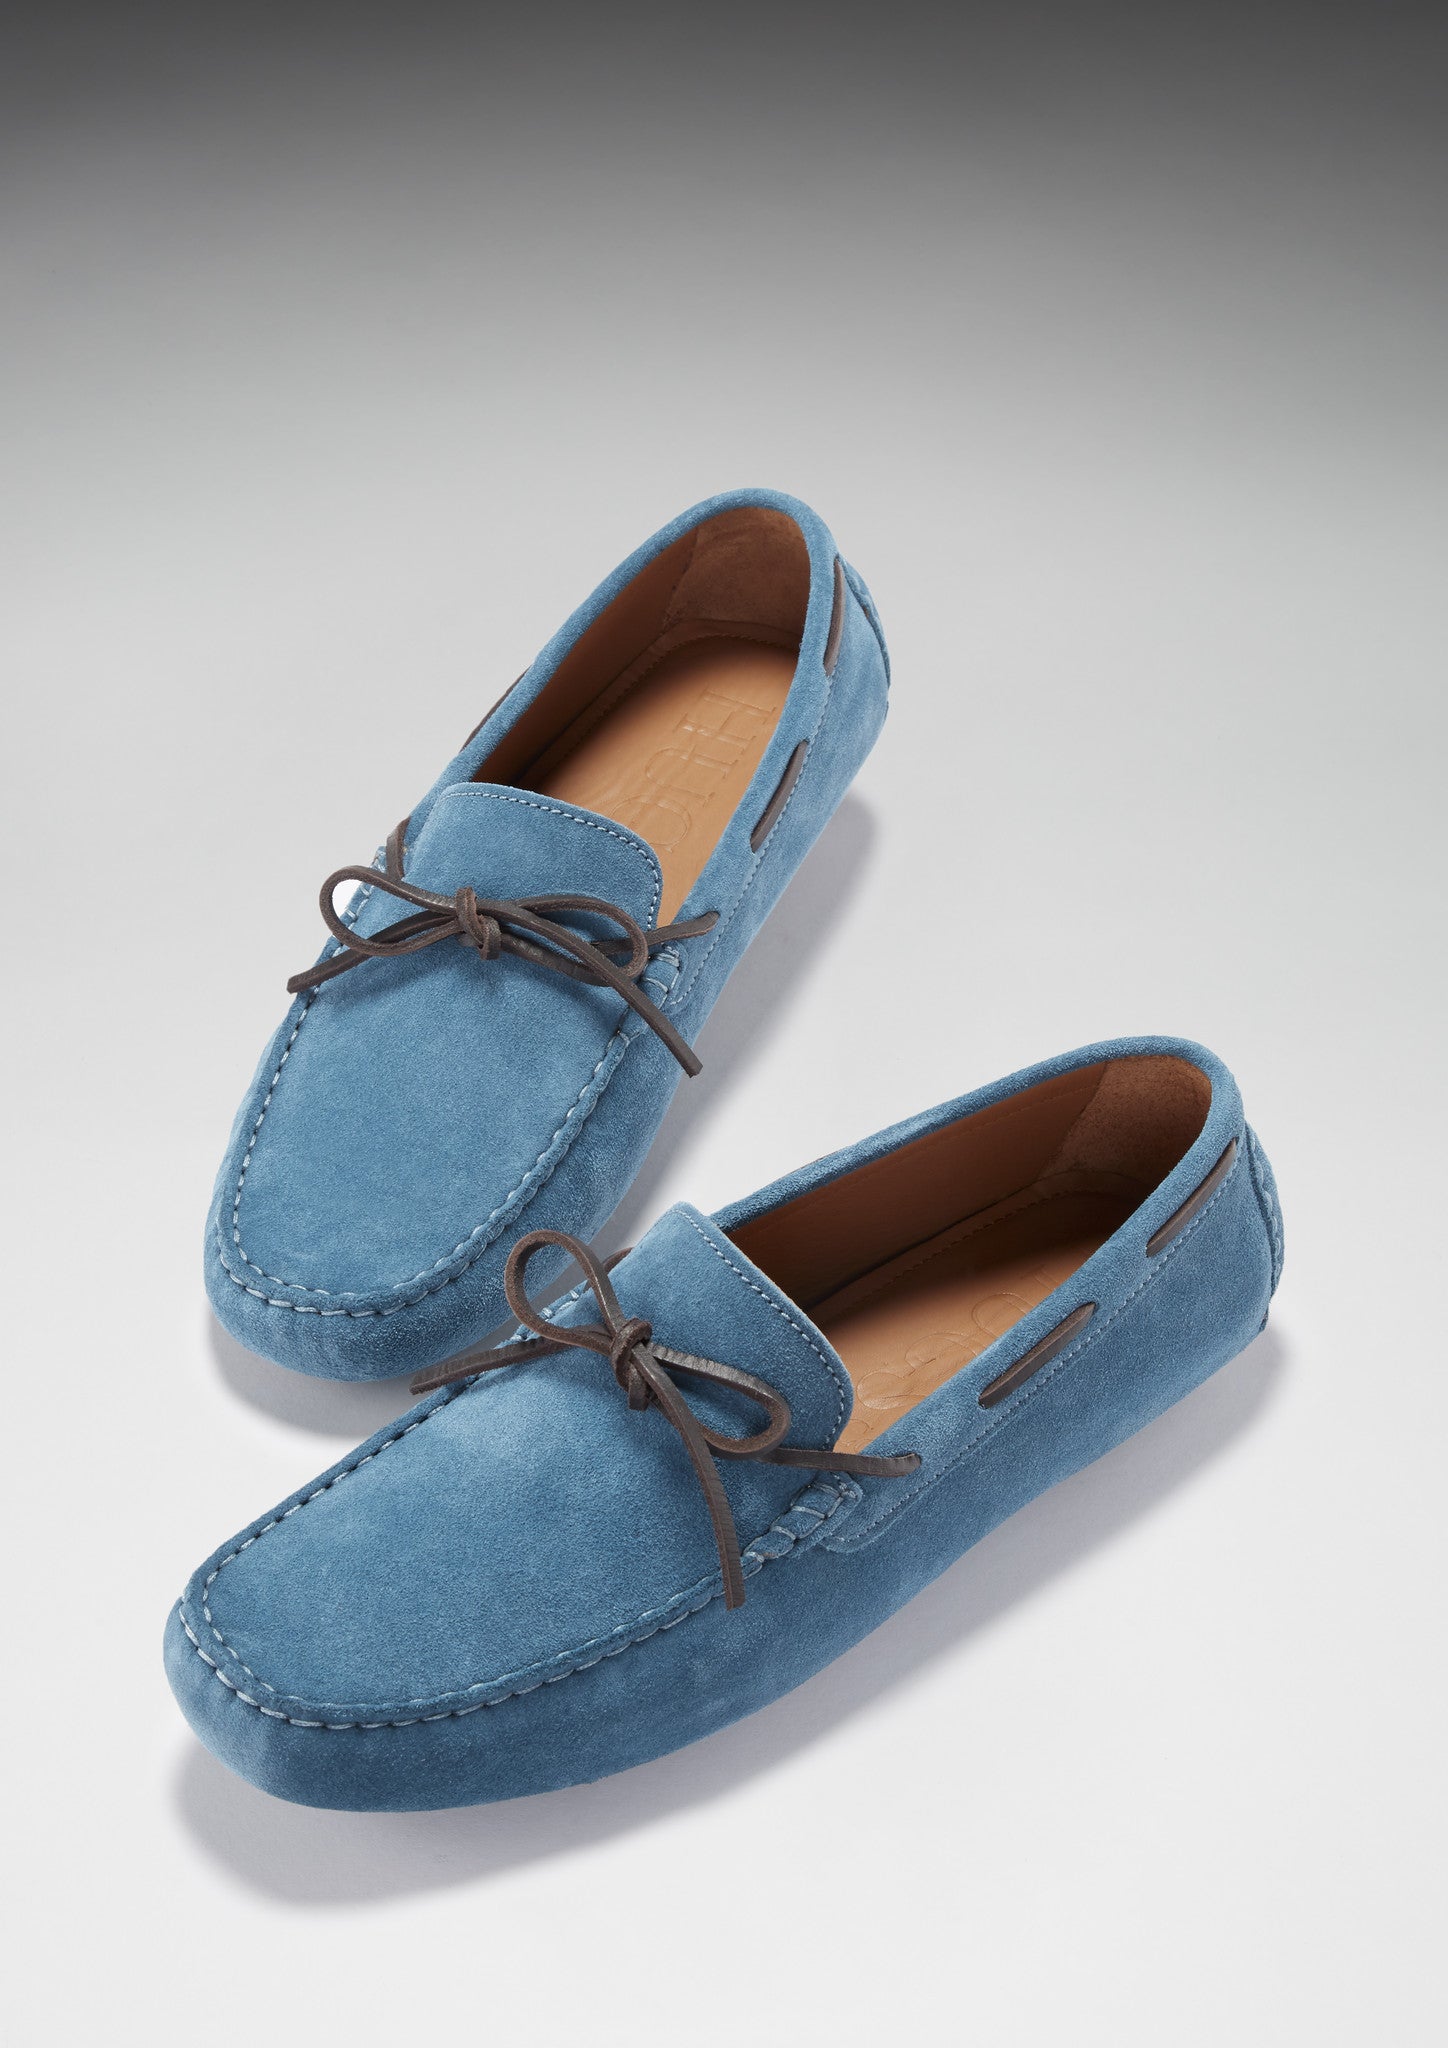 Laced Driving Loafers, petrol blue suede - Hugs & Co.